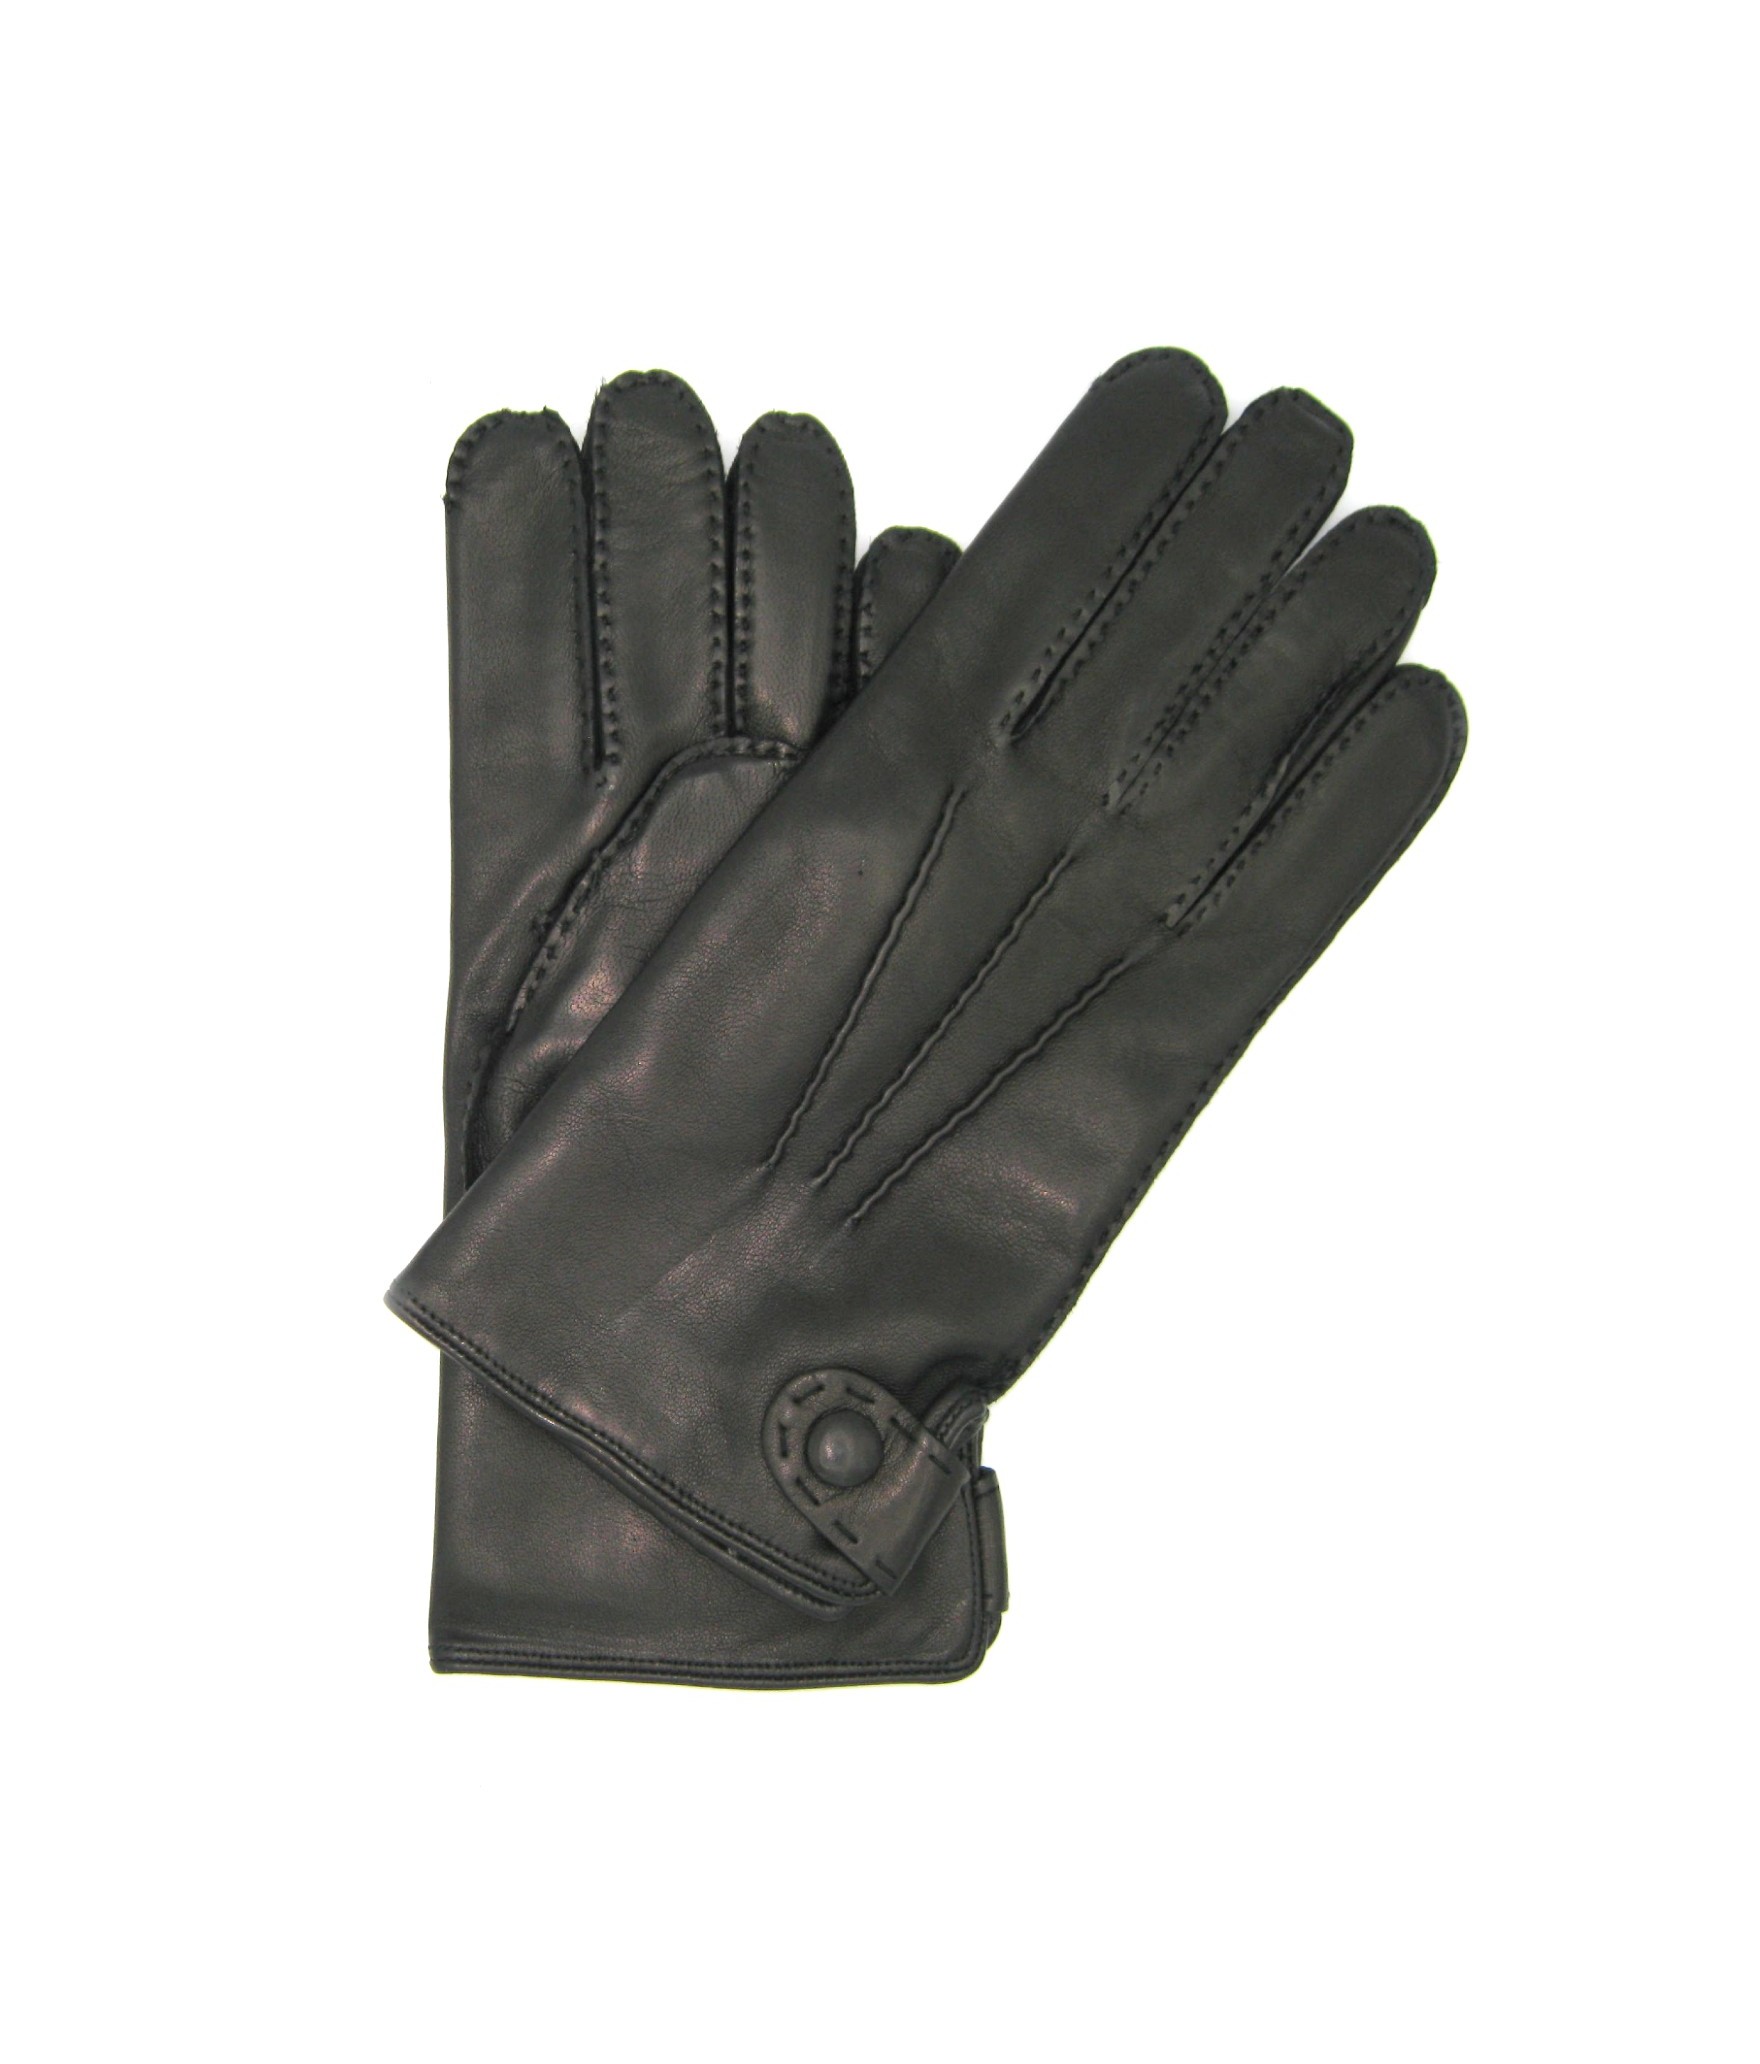 Uomo Fashion Nappa leather gloves with hand stitching and